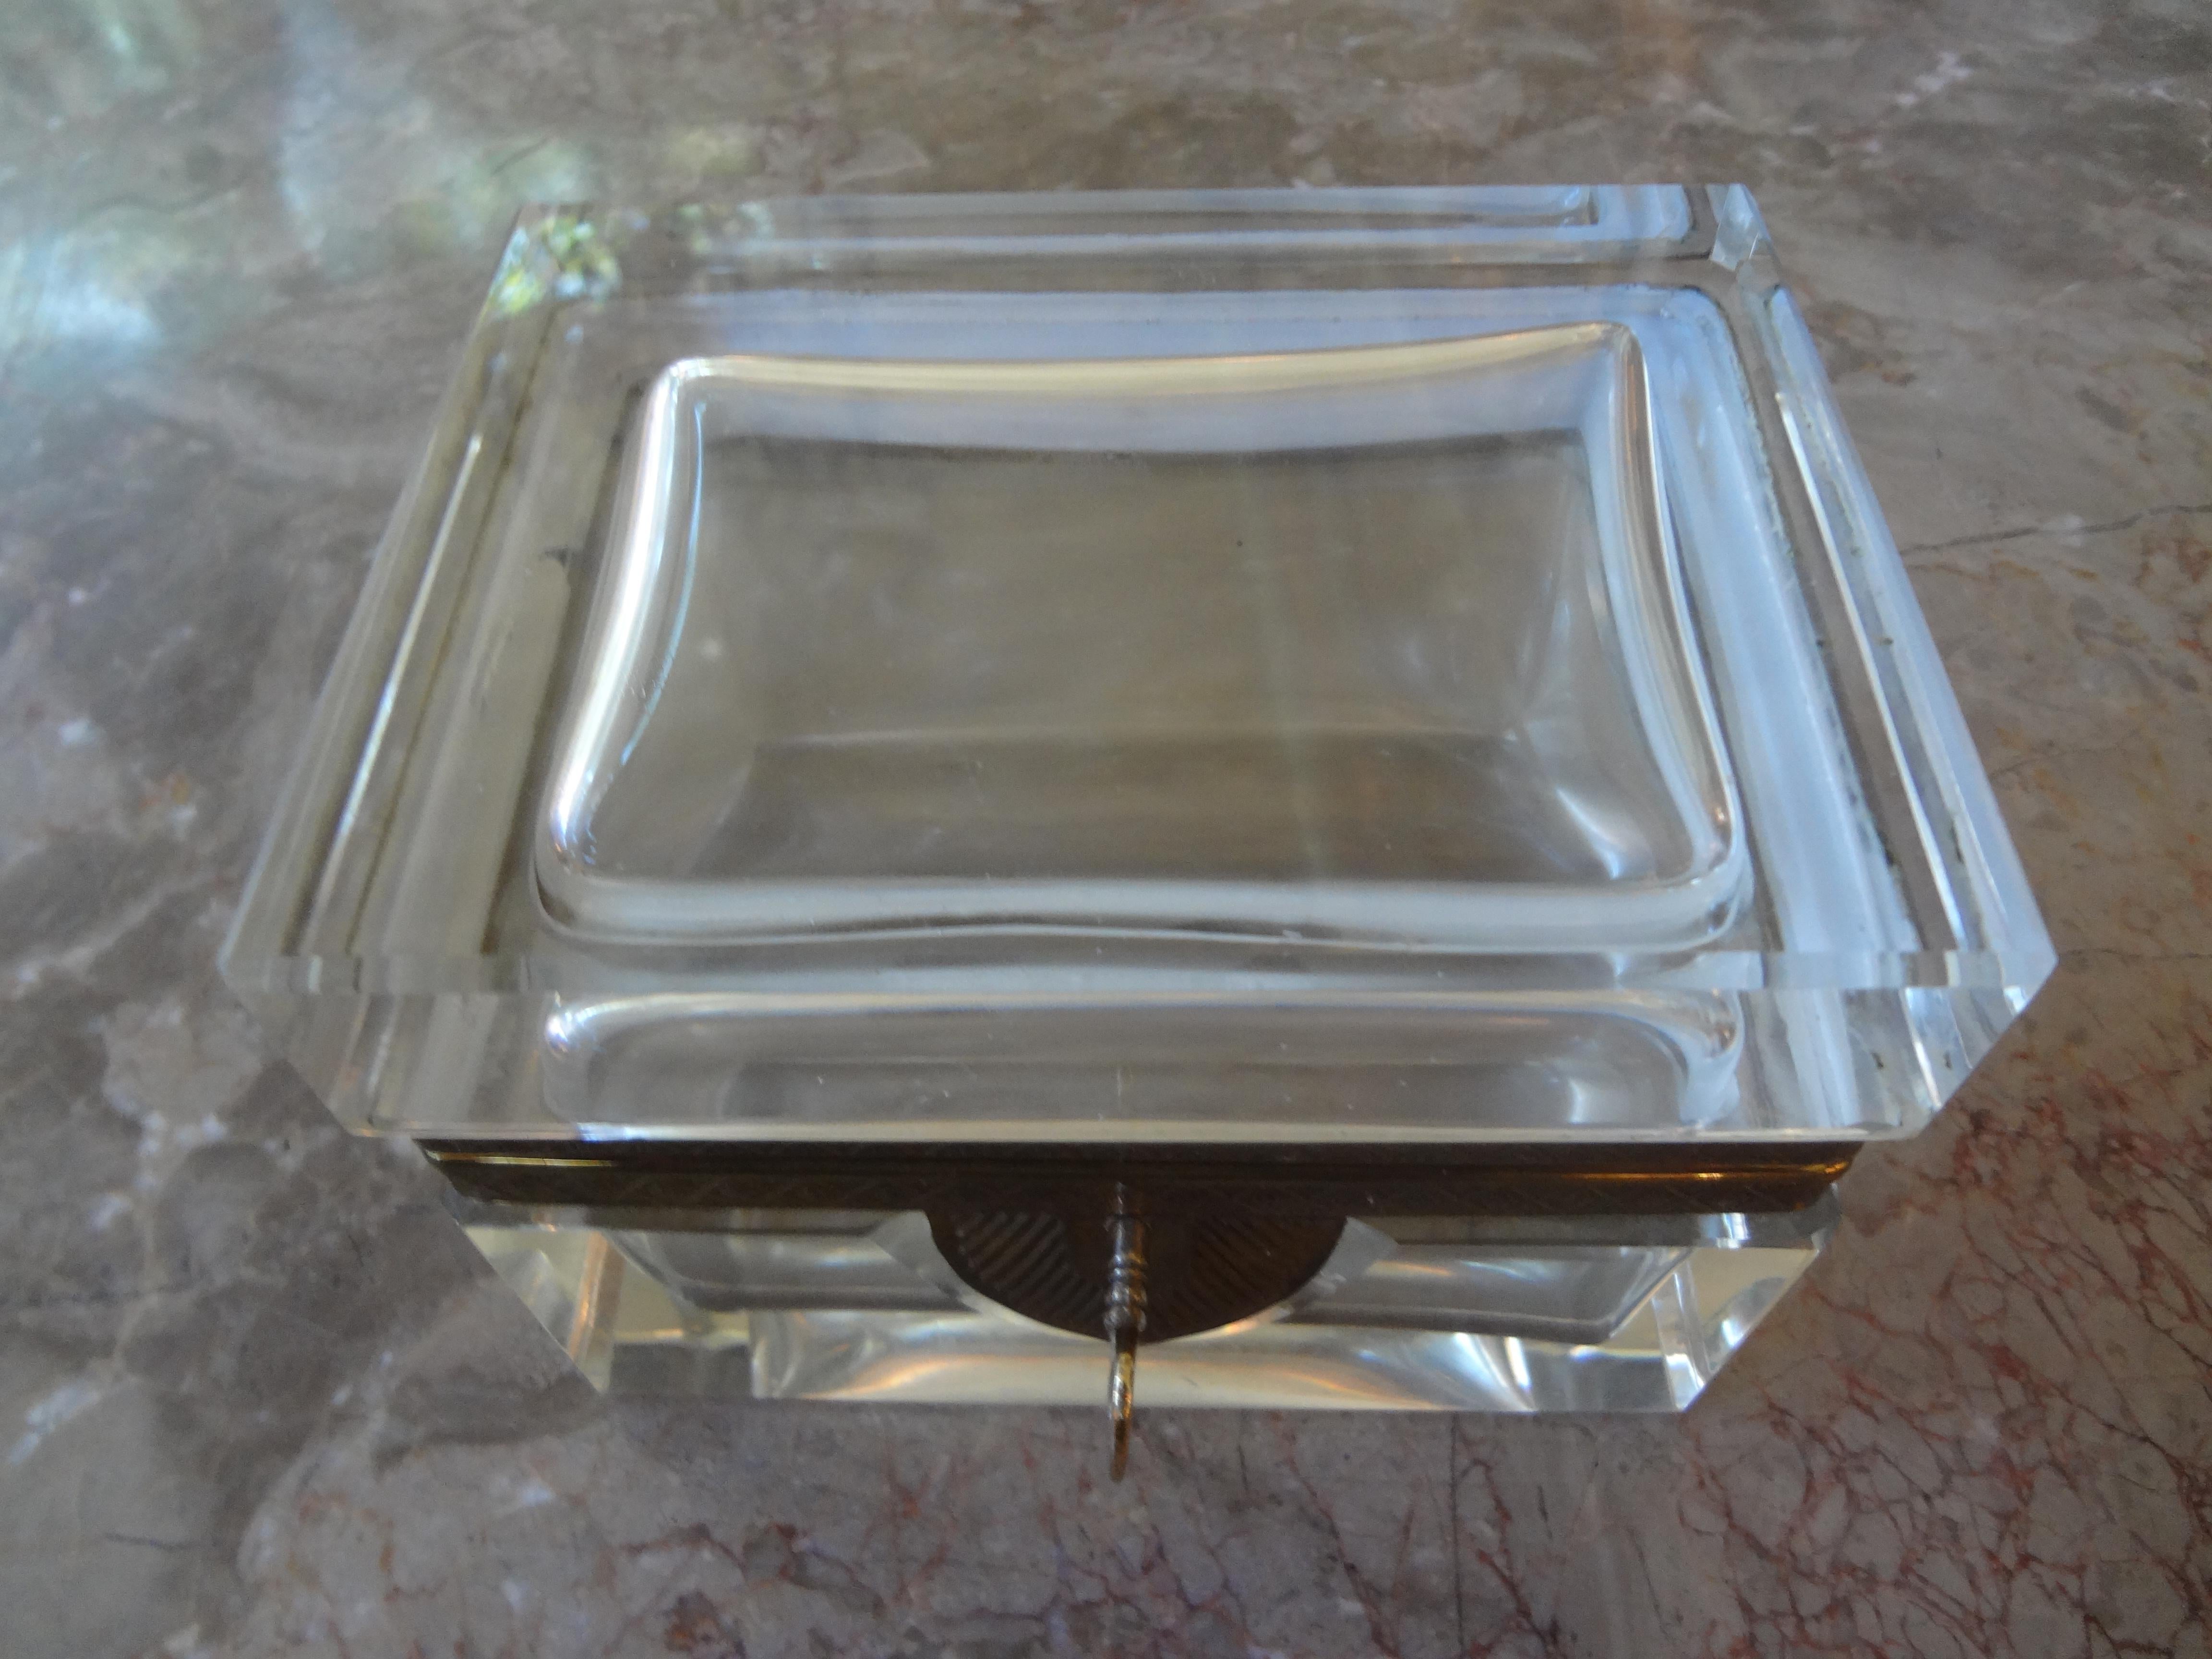 Stunning French crystal box with gilt metal fittings and key. This French crystal box was originally a jewel casket/jewelry box/vanity box/trinket box/Murano glass box. This French Baccarat style box would make a great decorative table accessory.
A